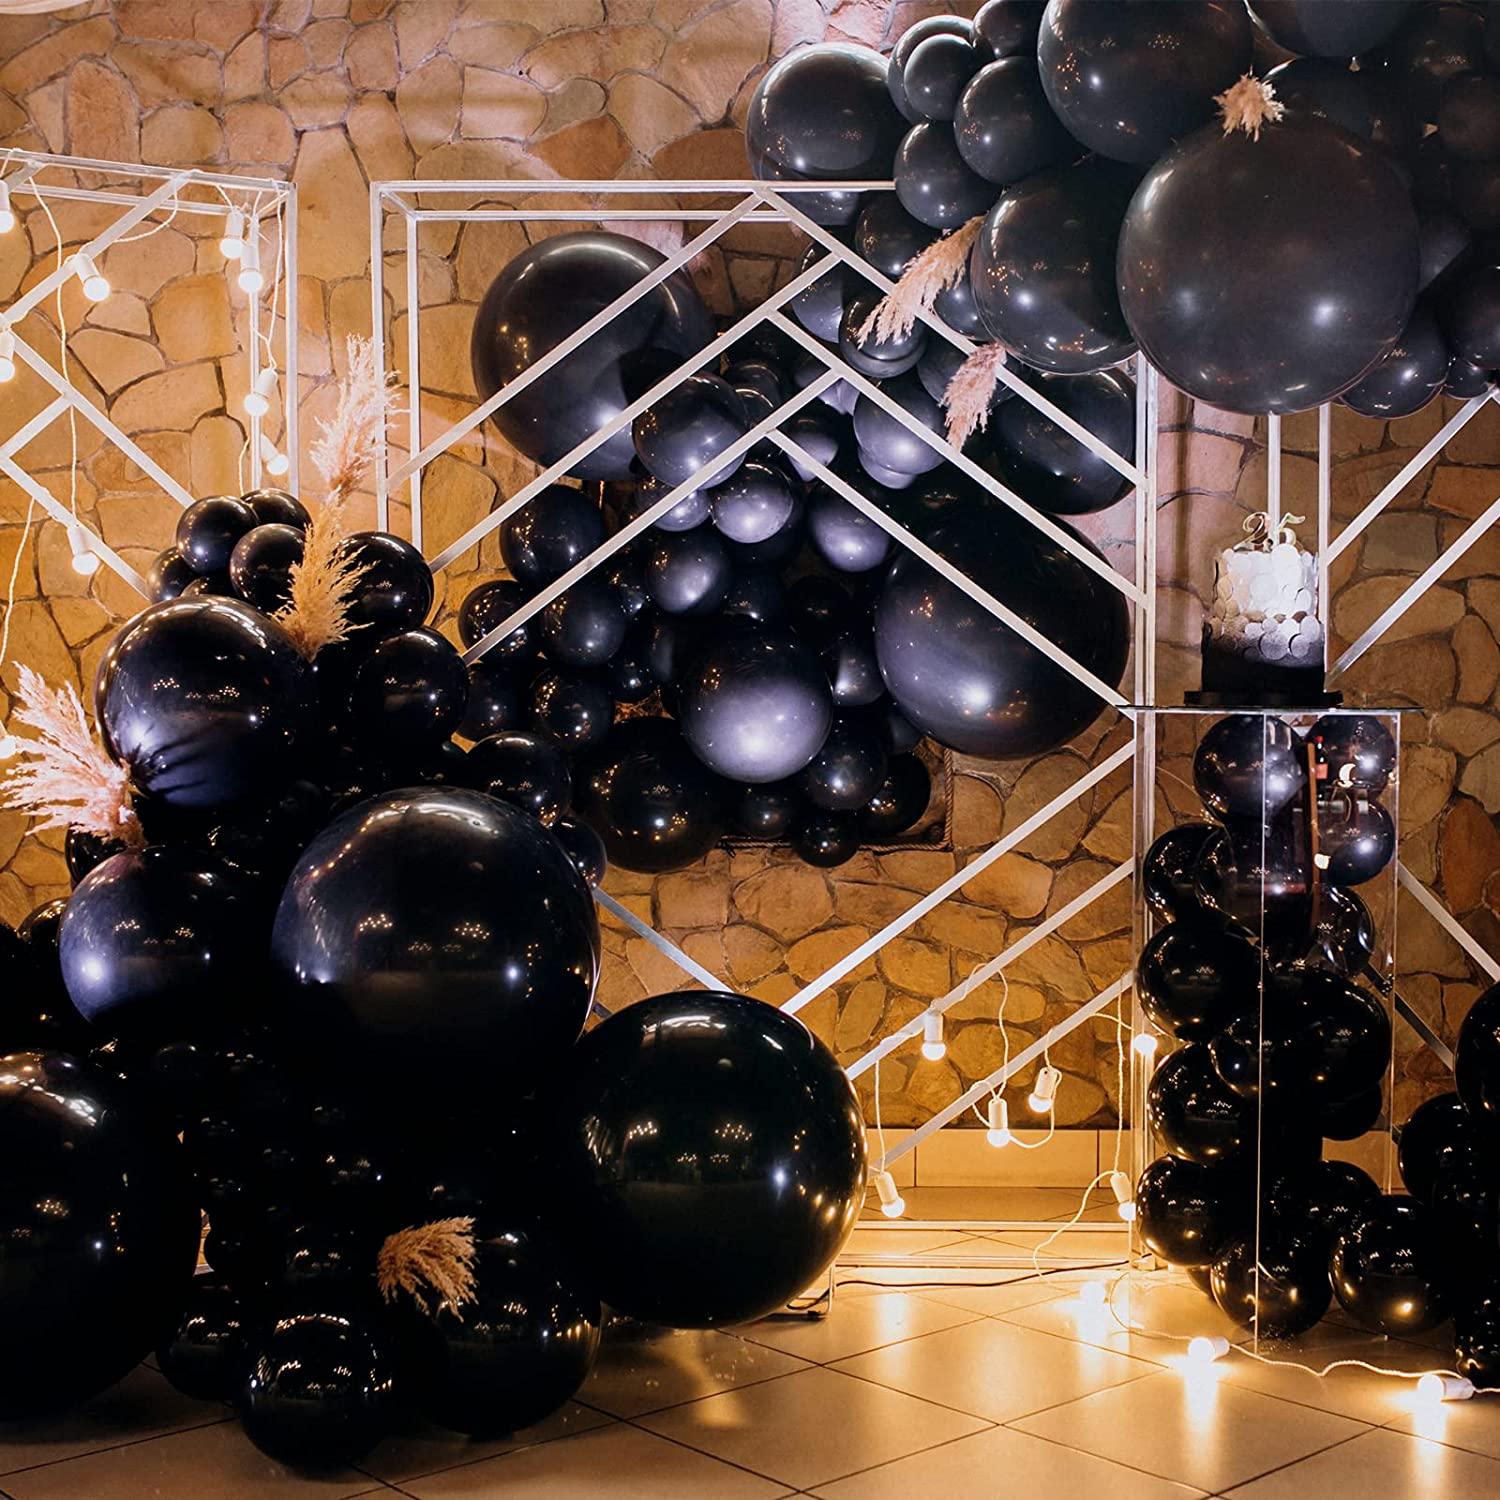 129pcs Black Balloons Latex Balloons Different Sizes 18 12 10 5 Inch Party Balloon Kit for Birthday Party Graduation Baby Shower Wedding Holiday Balloon Decoration - Lasercutwraps Shop